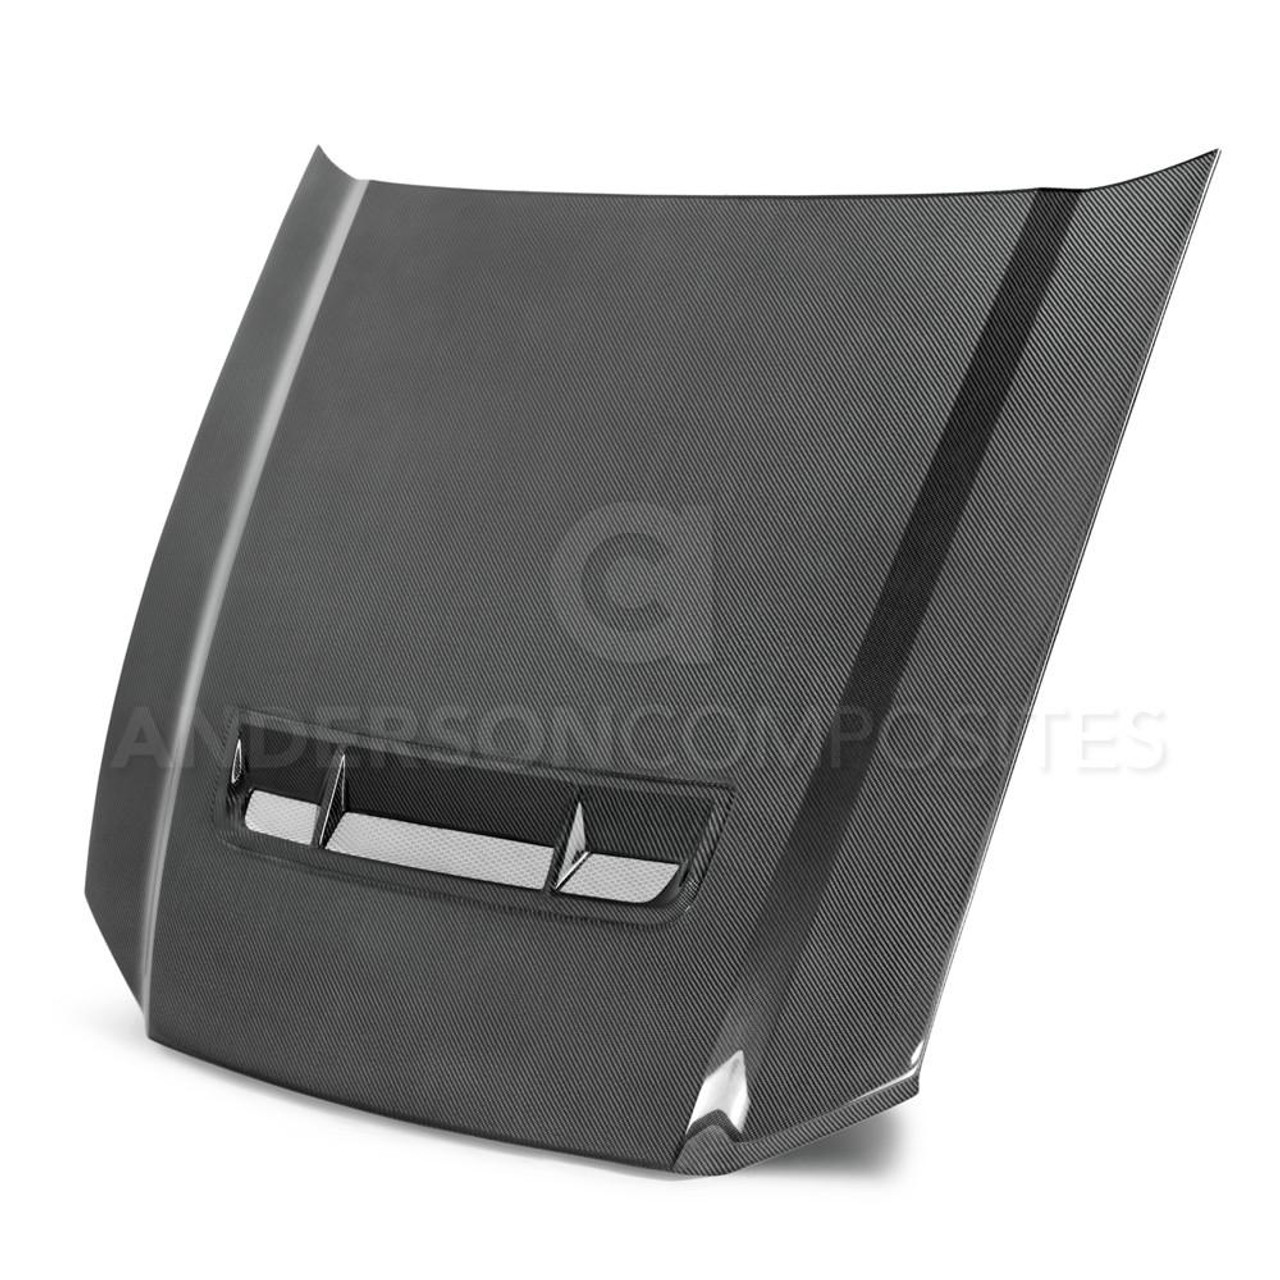 Anderson Composites 2010 - 2014 Shelby GT500 and 2013 - 2014 Mustang Carbon Fiber Hood